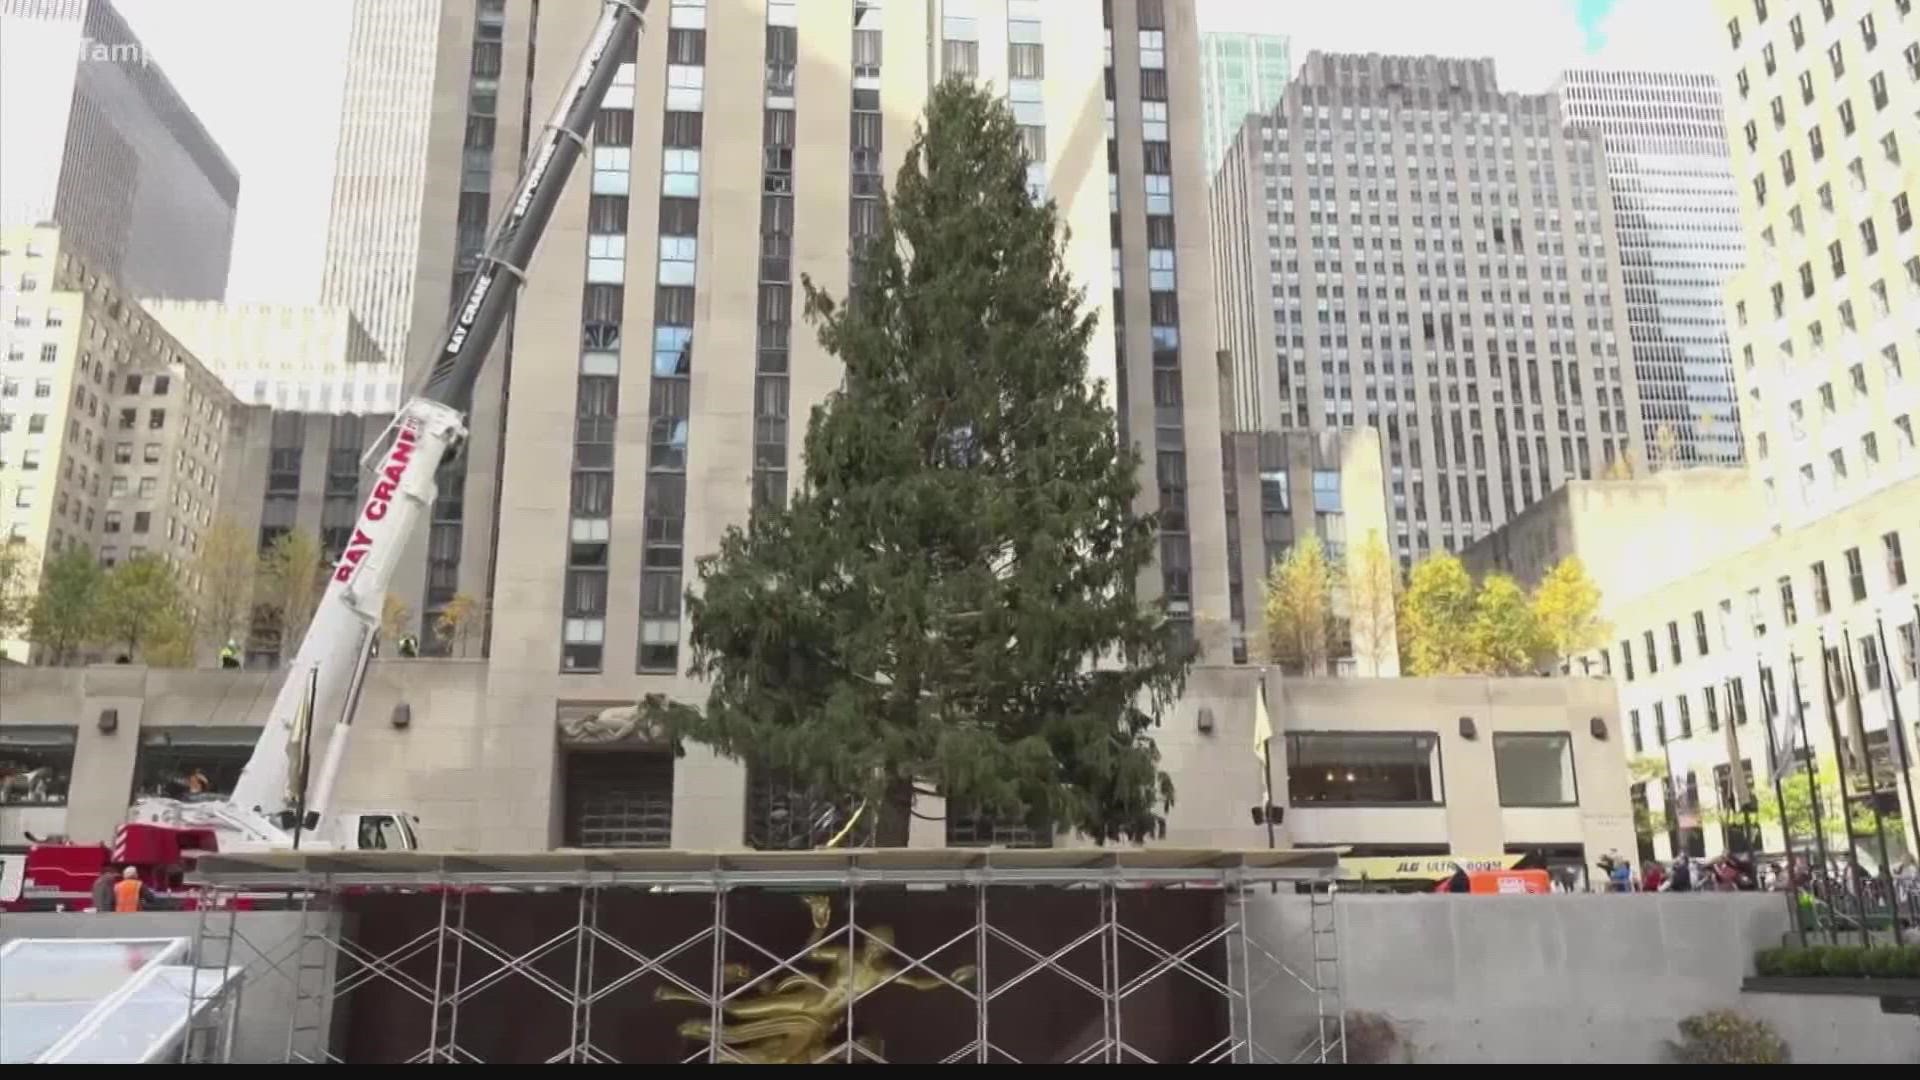 The 79-foot Norway Spruce arrived Saturday from Maryland.